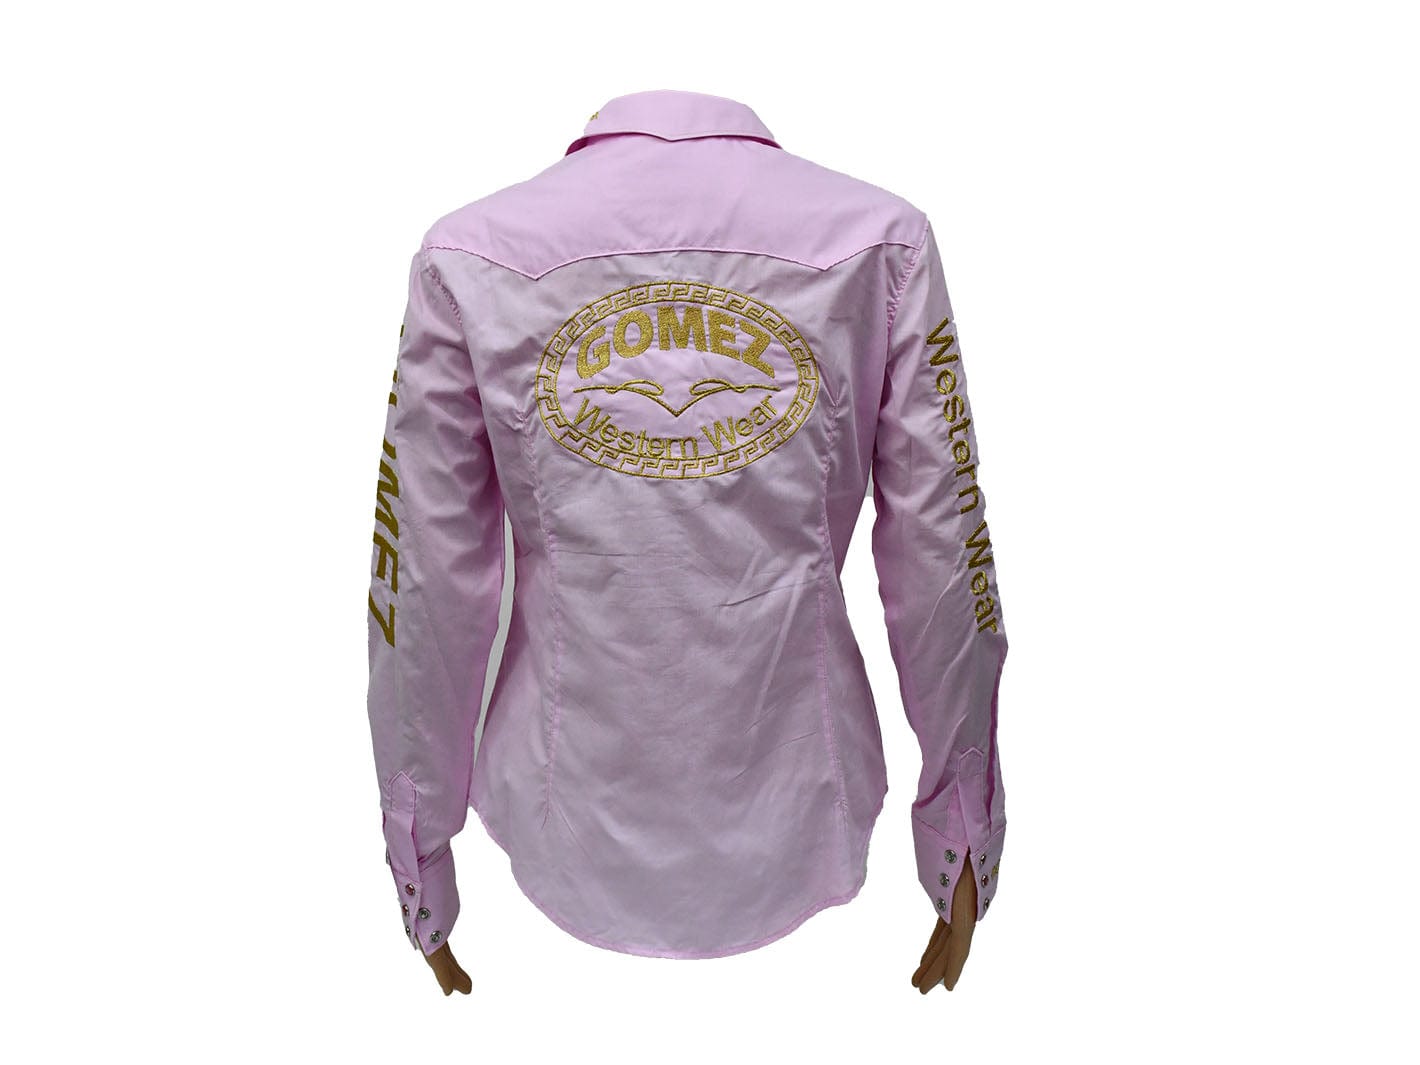 Gomez Womens Long Sleeve Western Shirt Black/White/Vino/Red/Blue/Pink/ With Gold